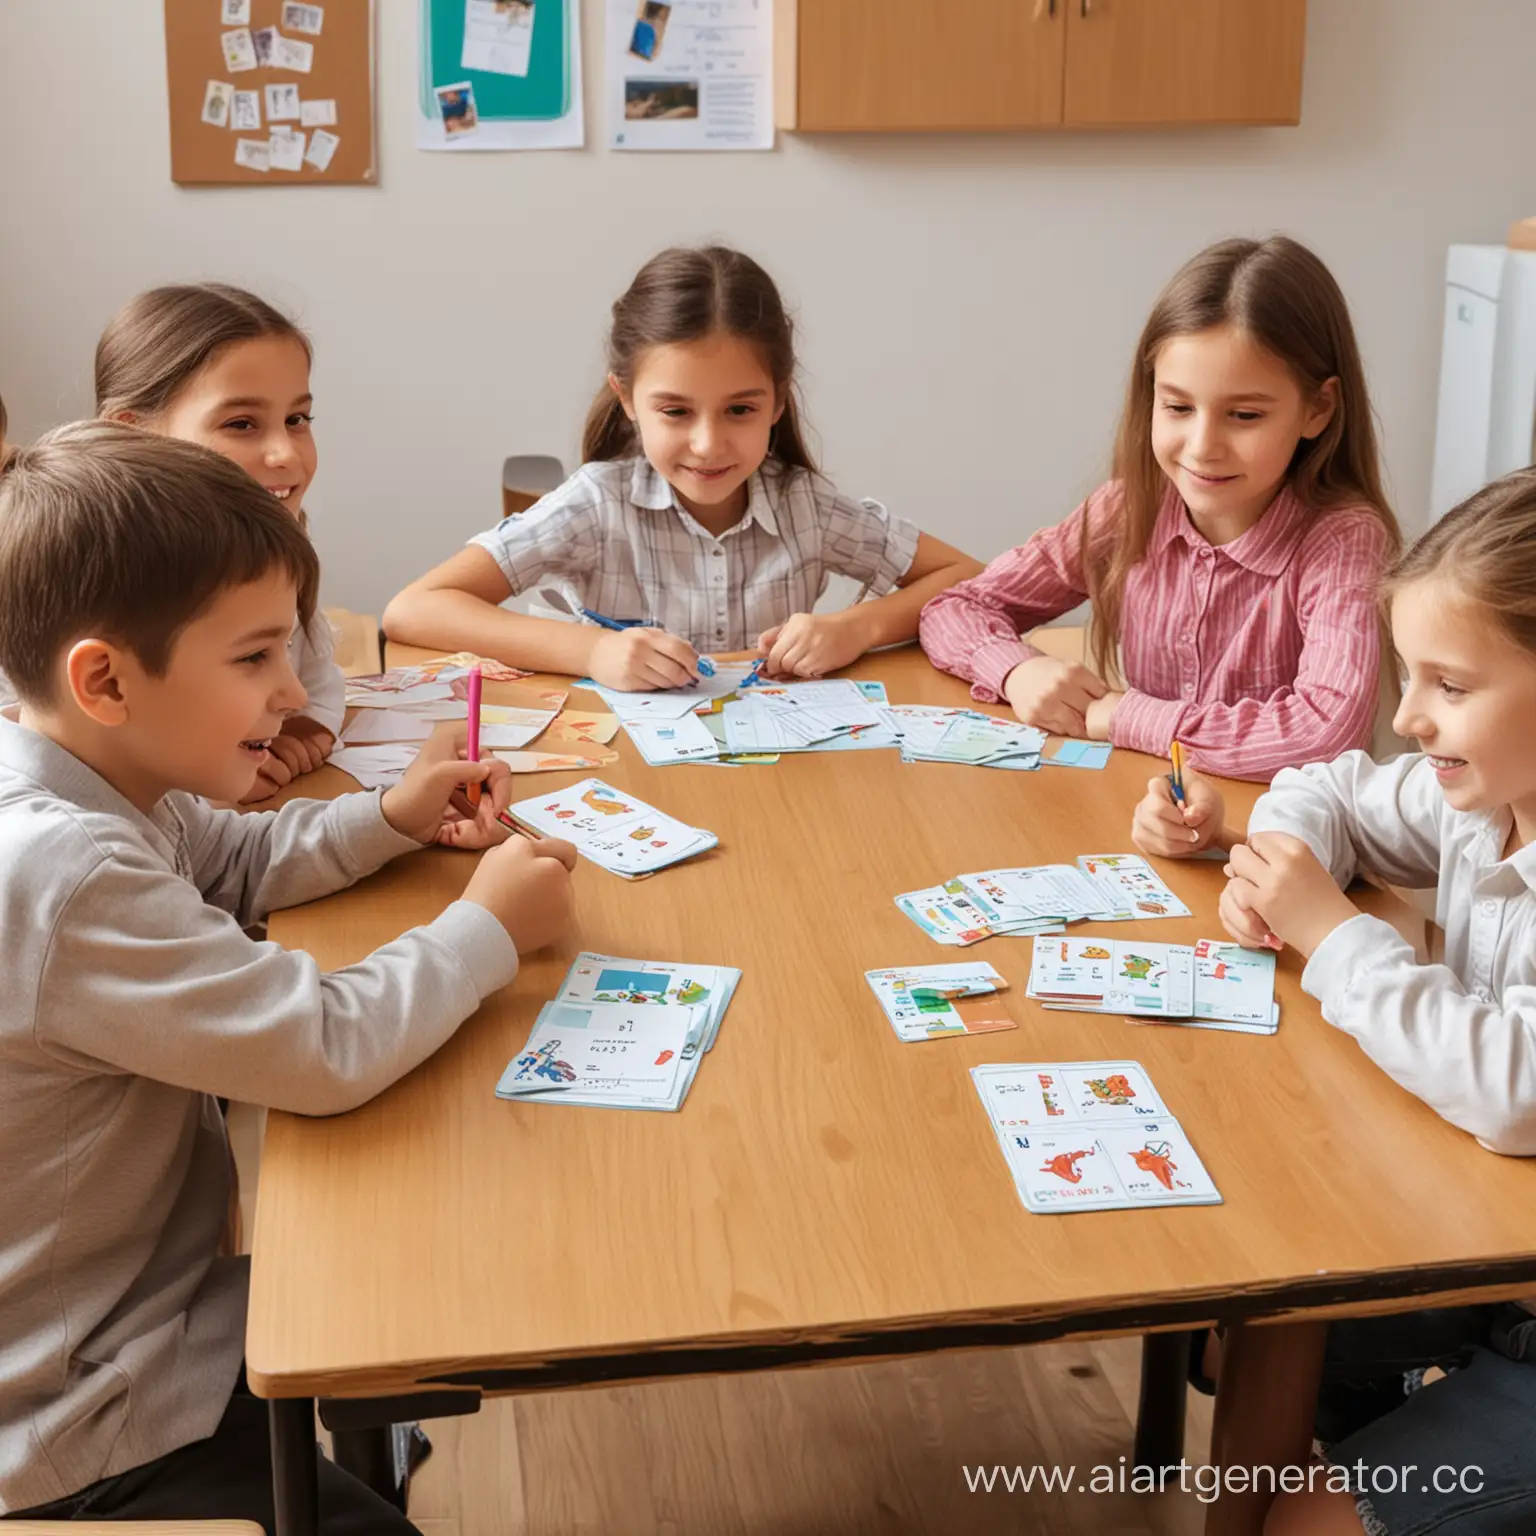 Children-Engaged-in-English-Lesson-with-Educational-Game-and-Cards